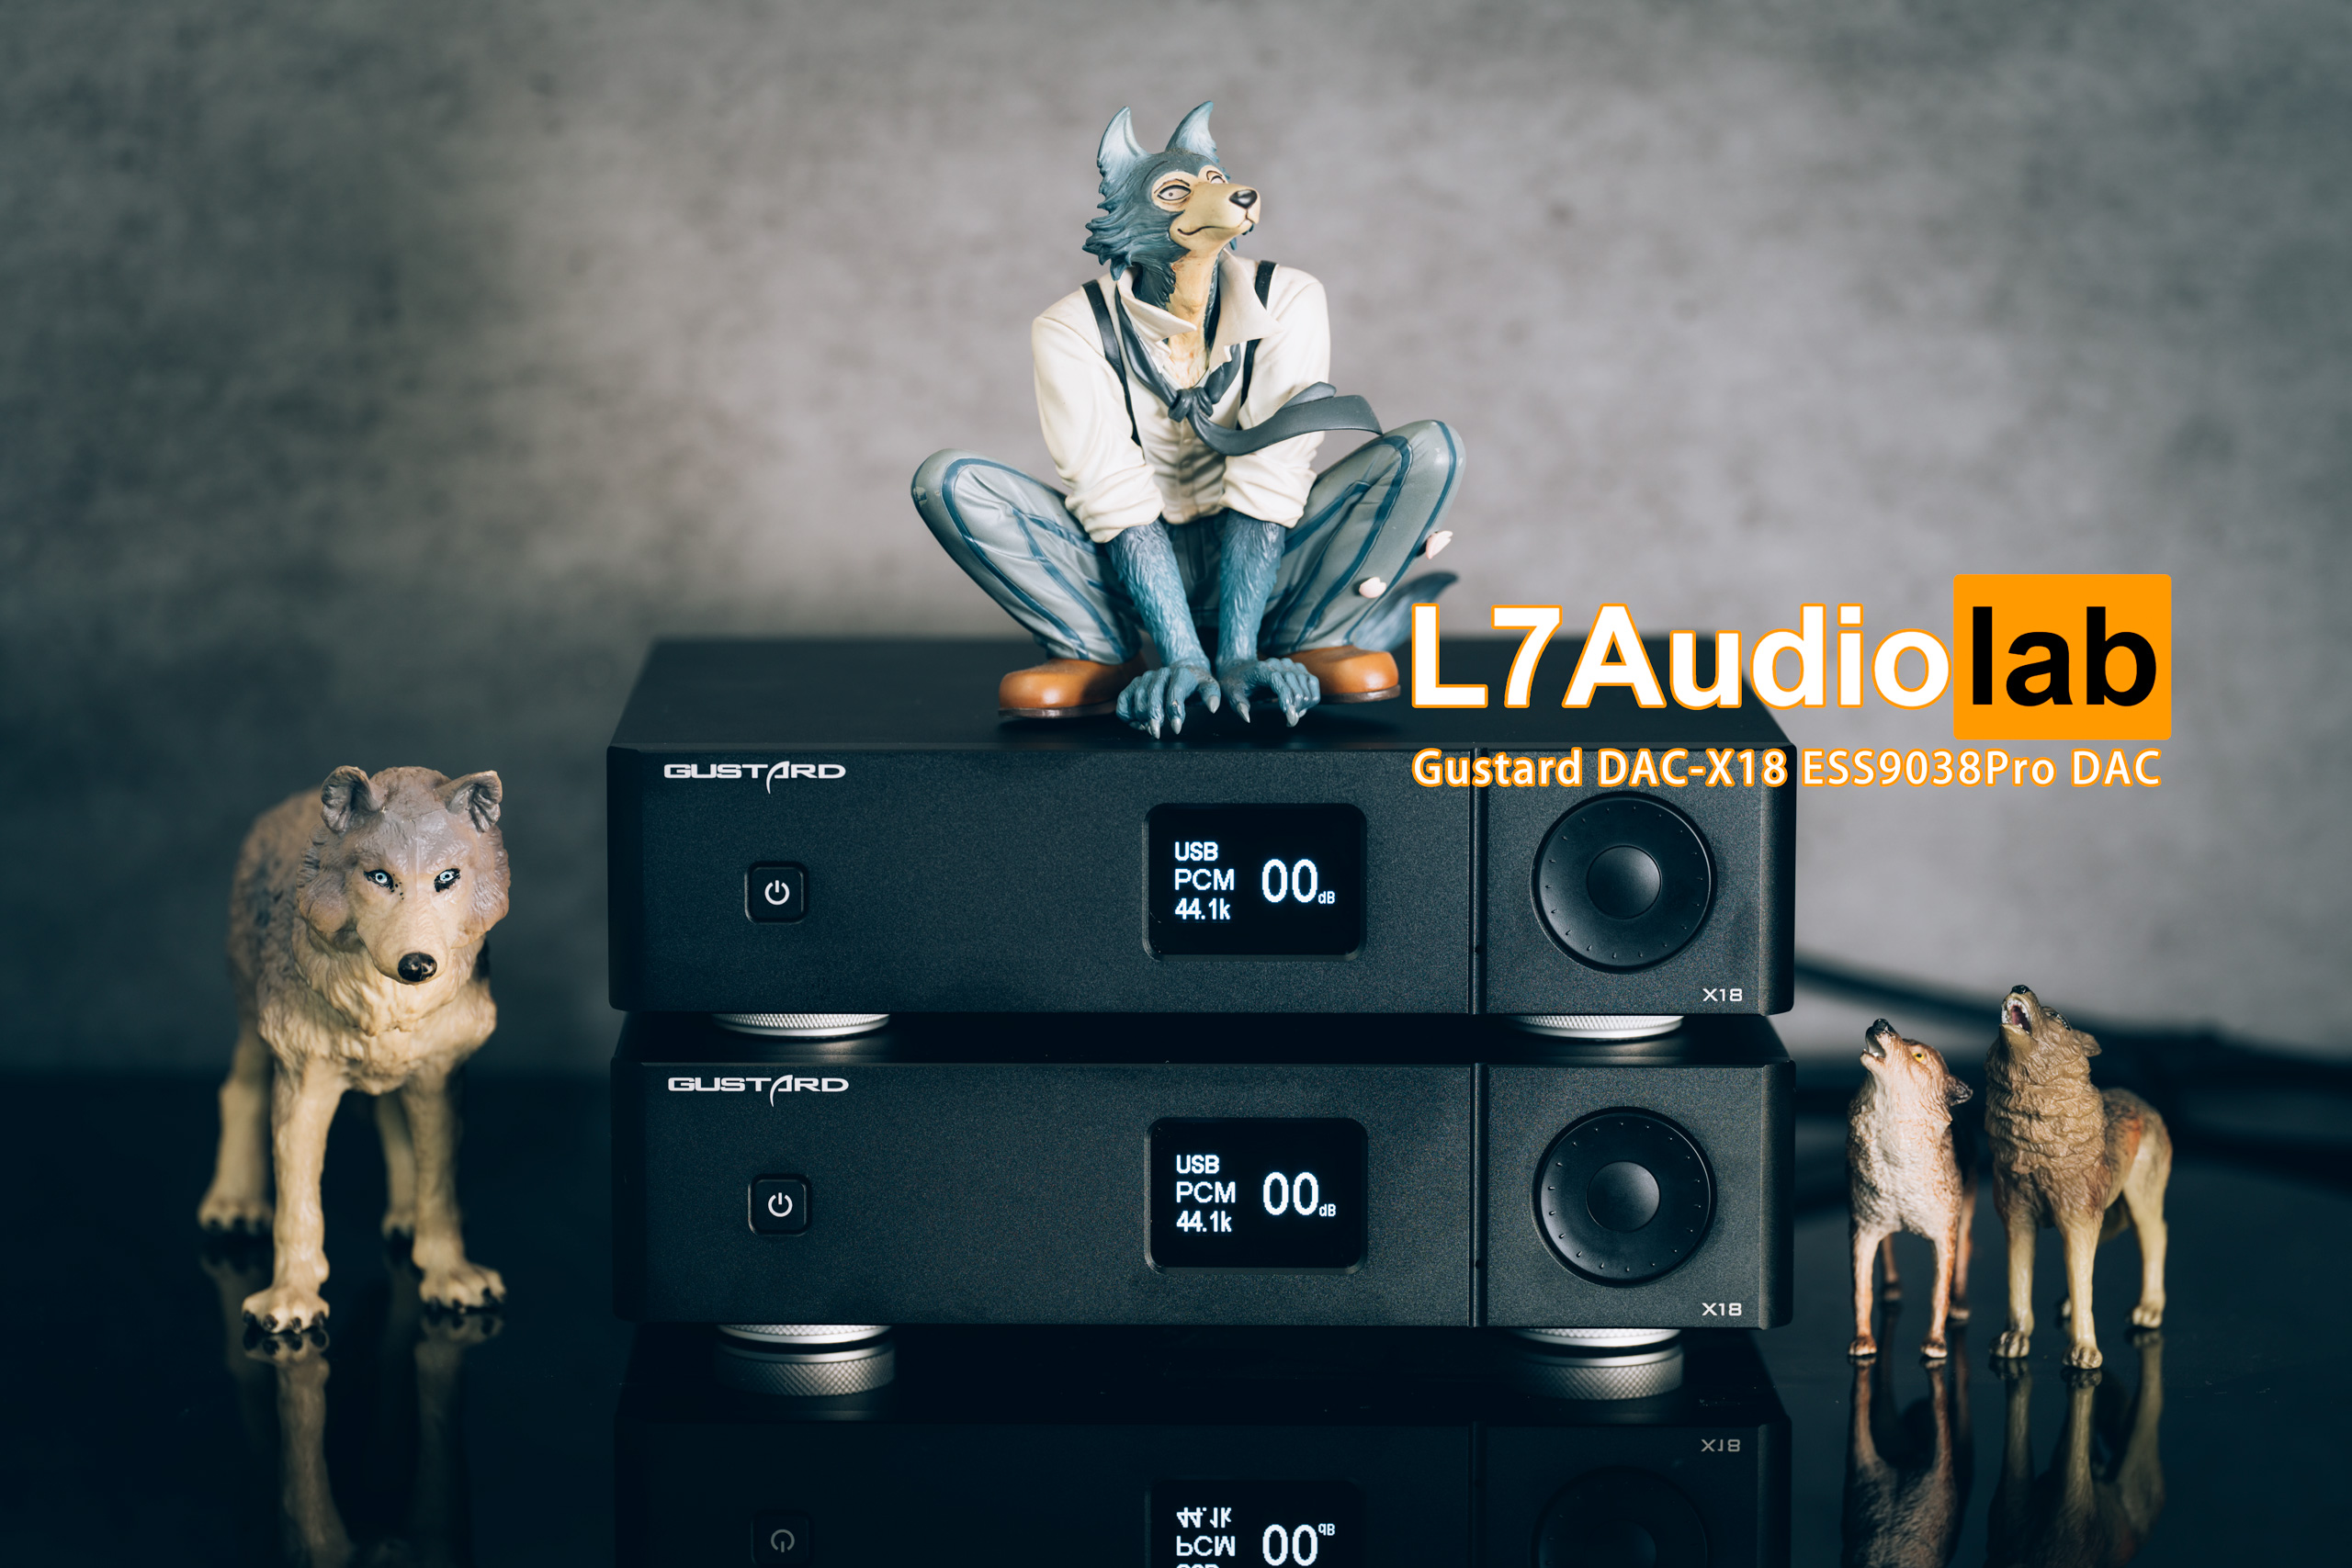 Measurements & Review of Gustard DAC-X18 - L7Audiolab